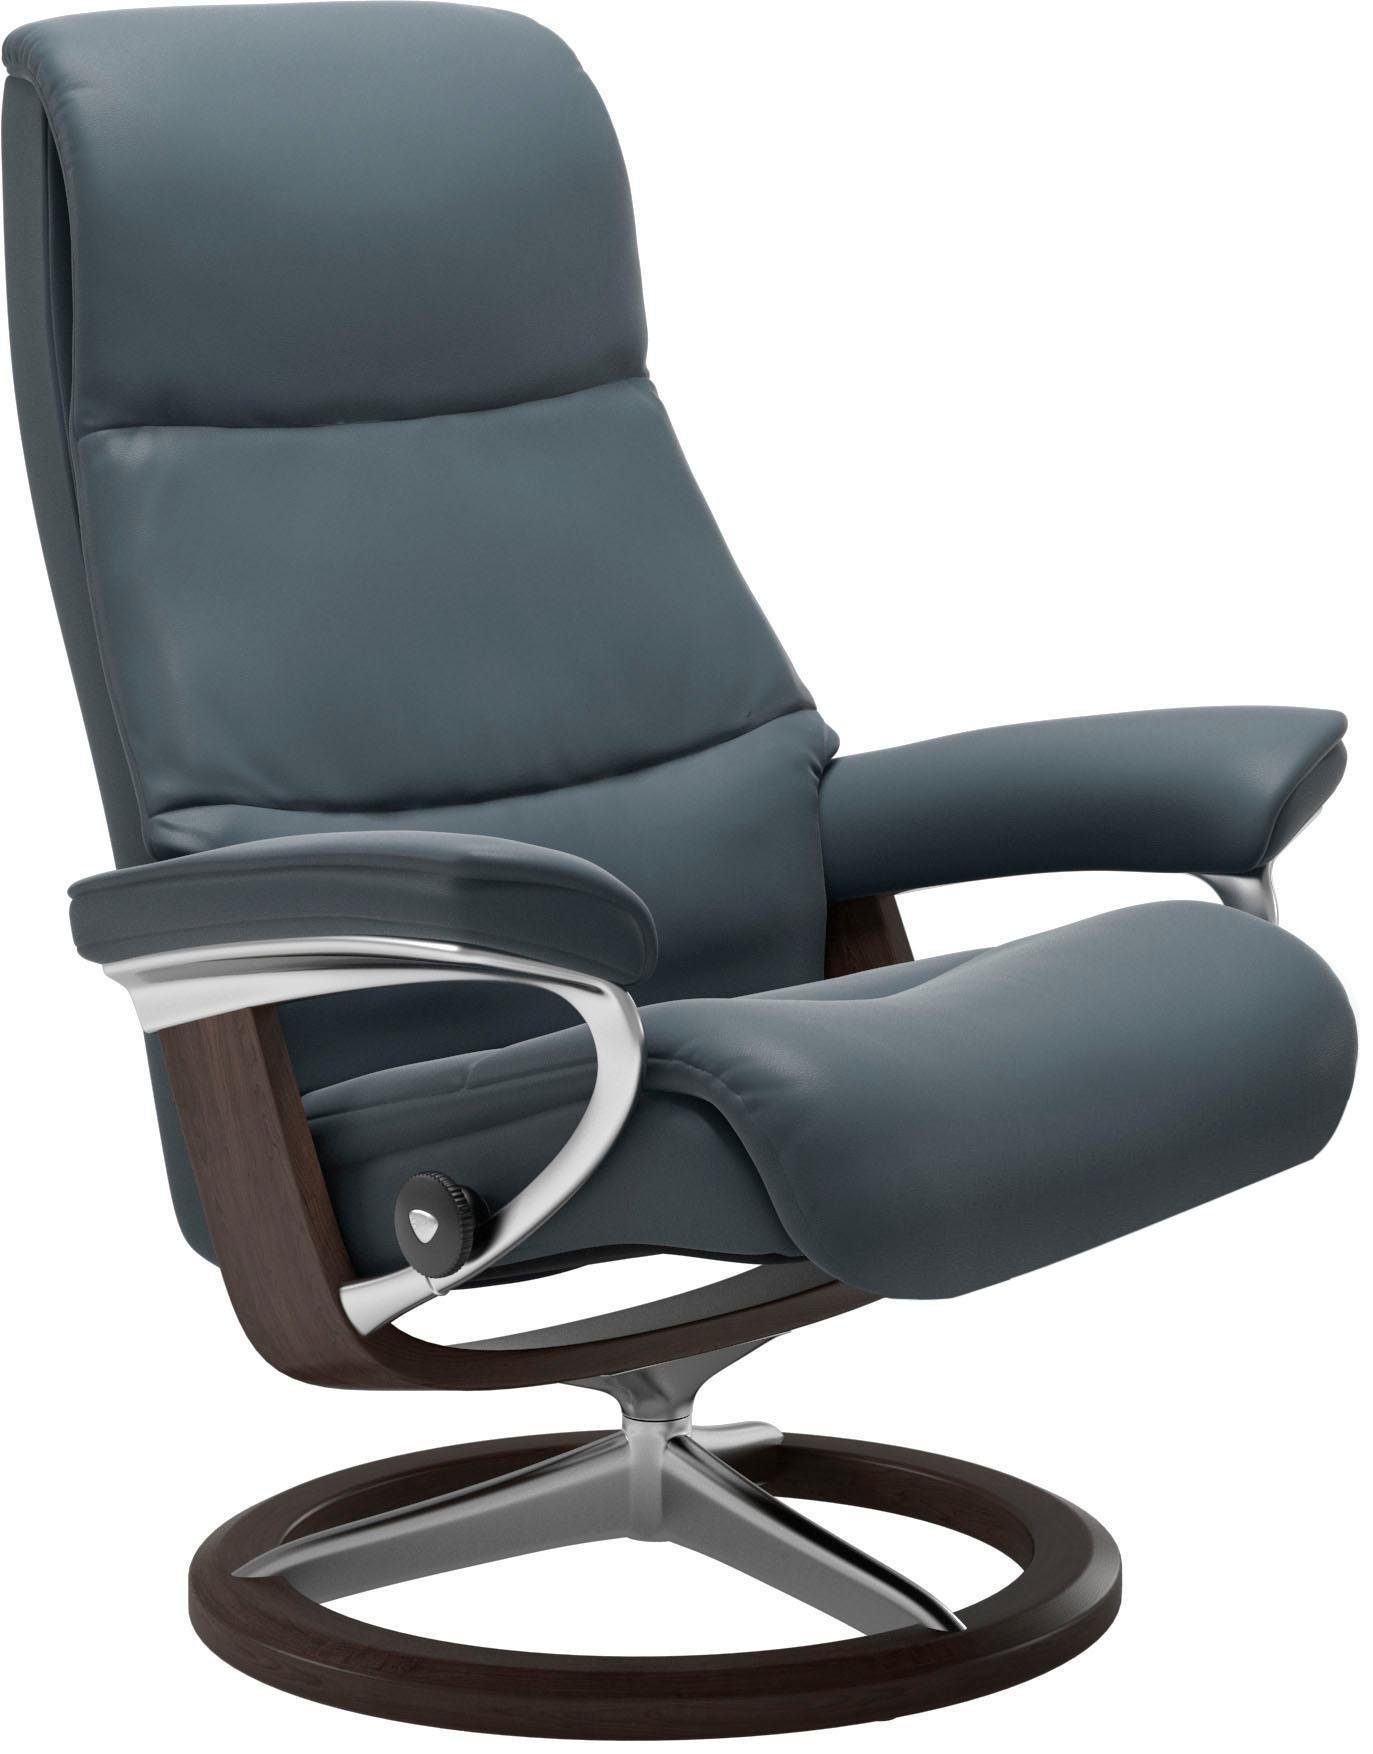 Wenge Stressless® Relaxsessel Signature S,Gestell Base, View, Größe mit